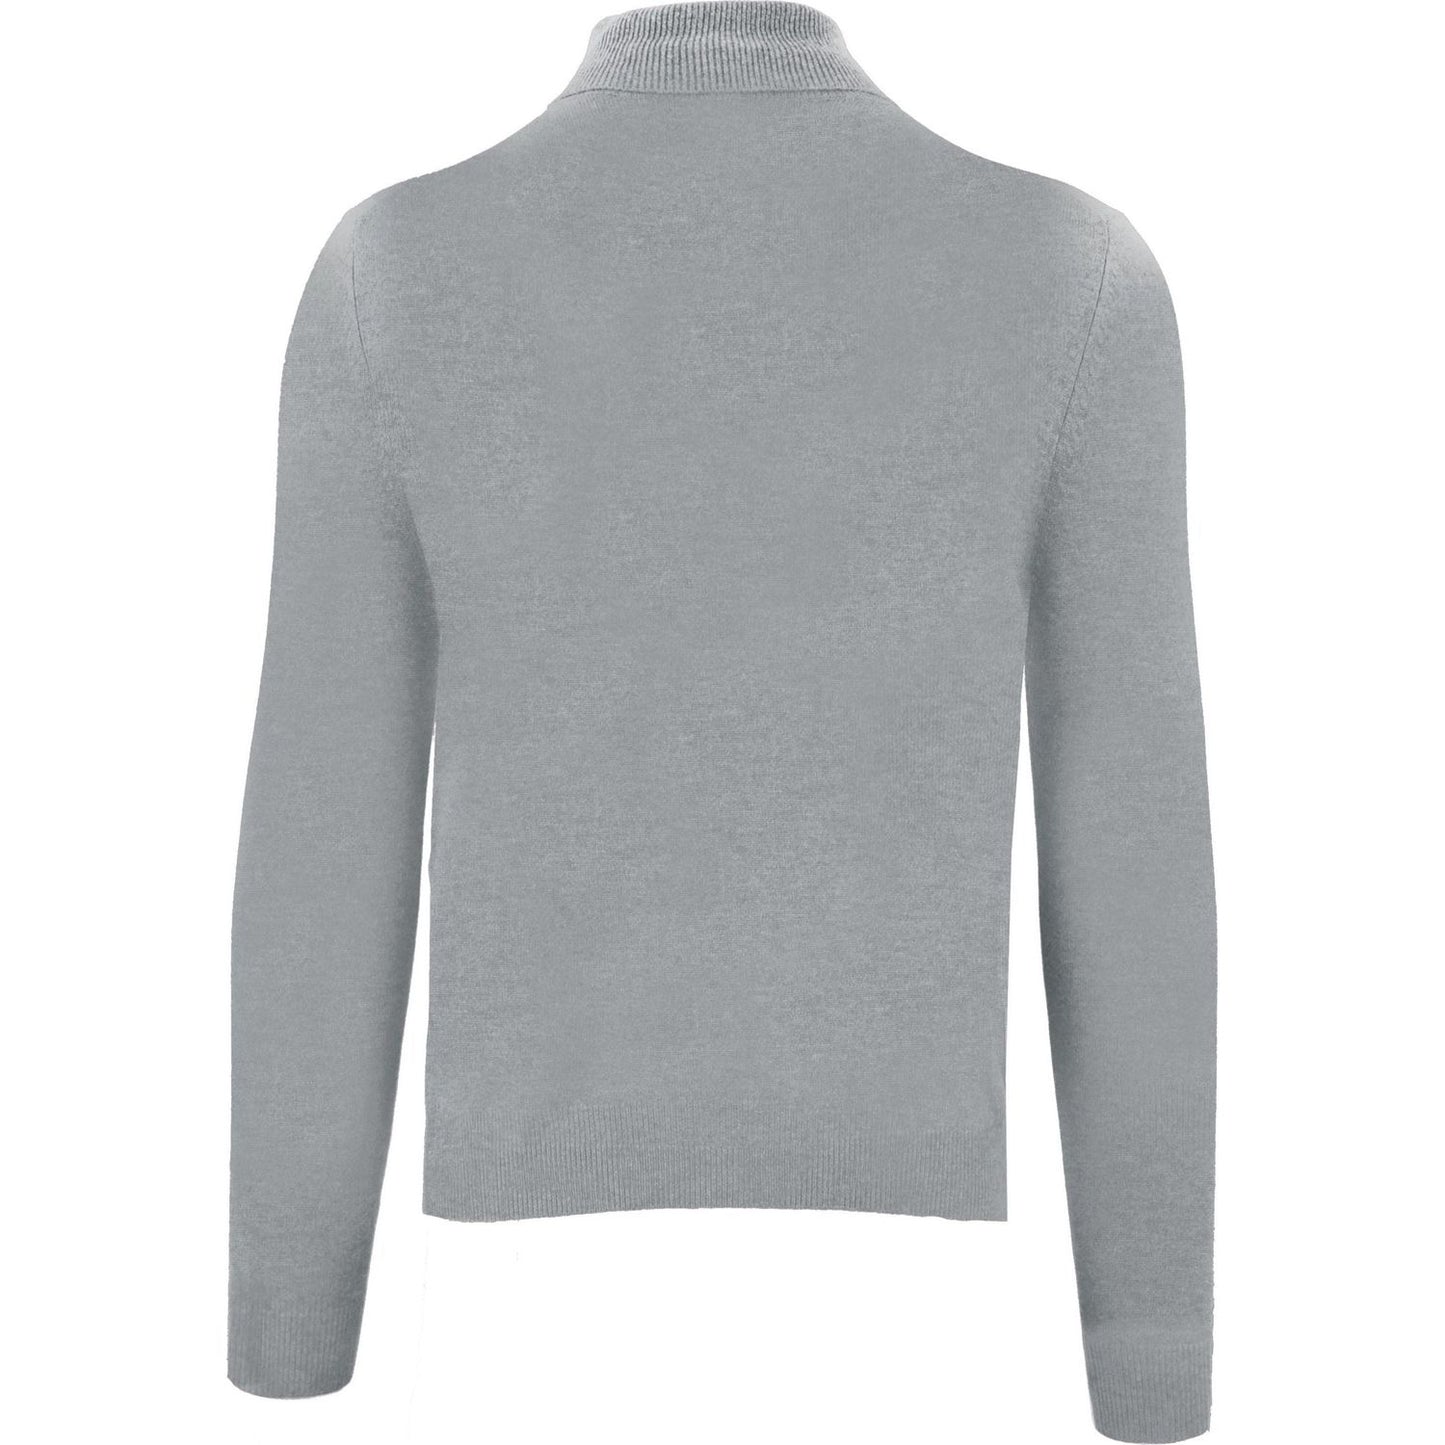 Malo Elevated Cashmere High Neck Sweater MAN SWEATERS gray-cashmere-sweater-3 product-7510-86521919-48-scaled-4496f71e-306.jpg